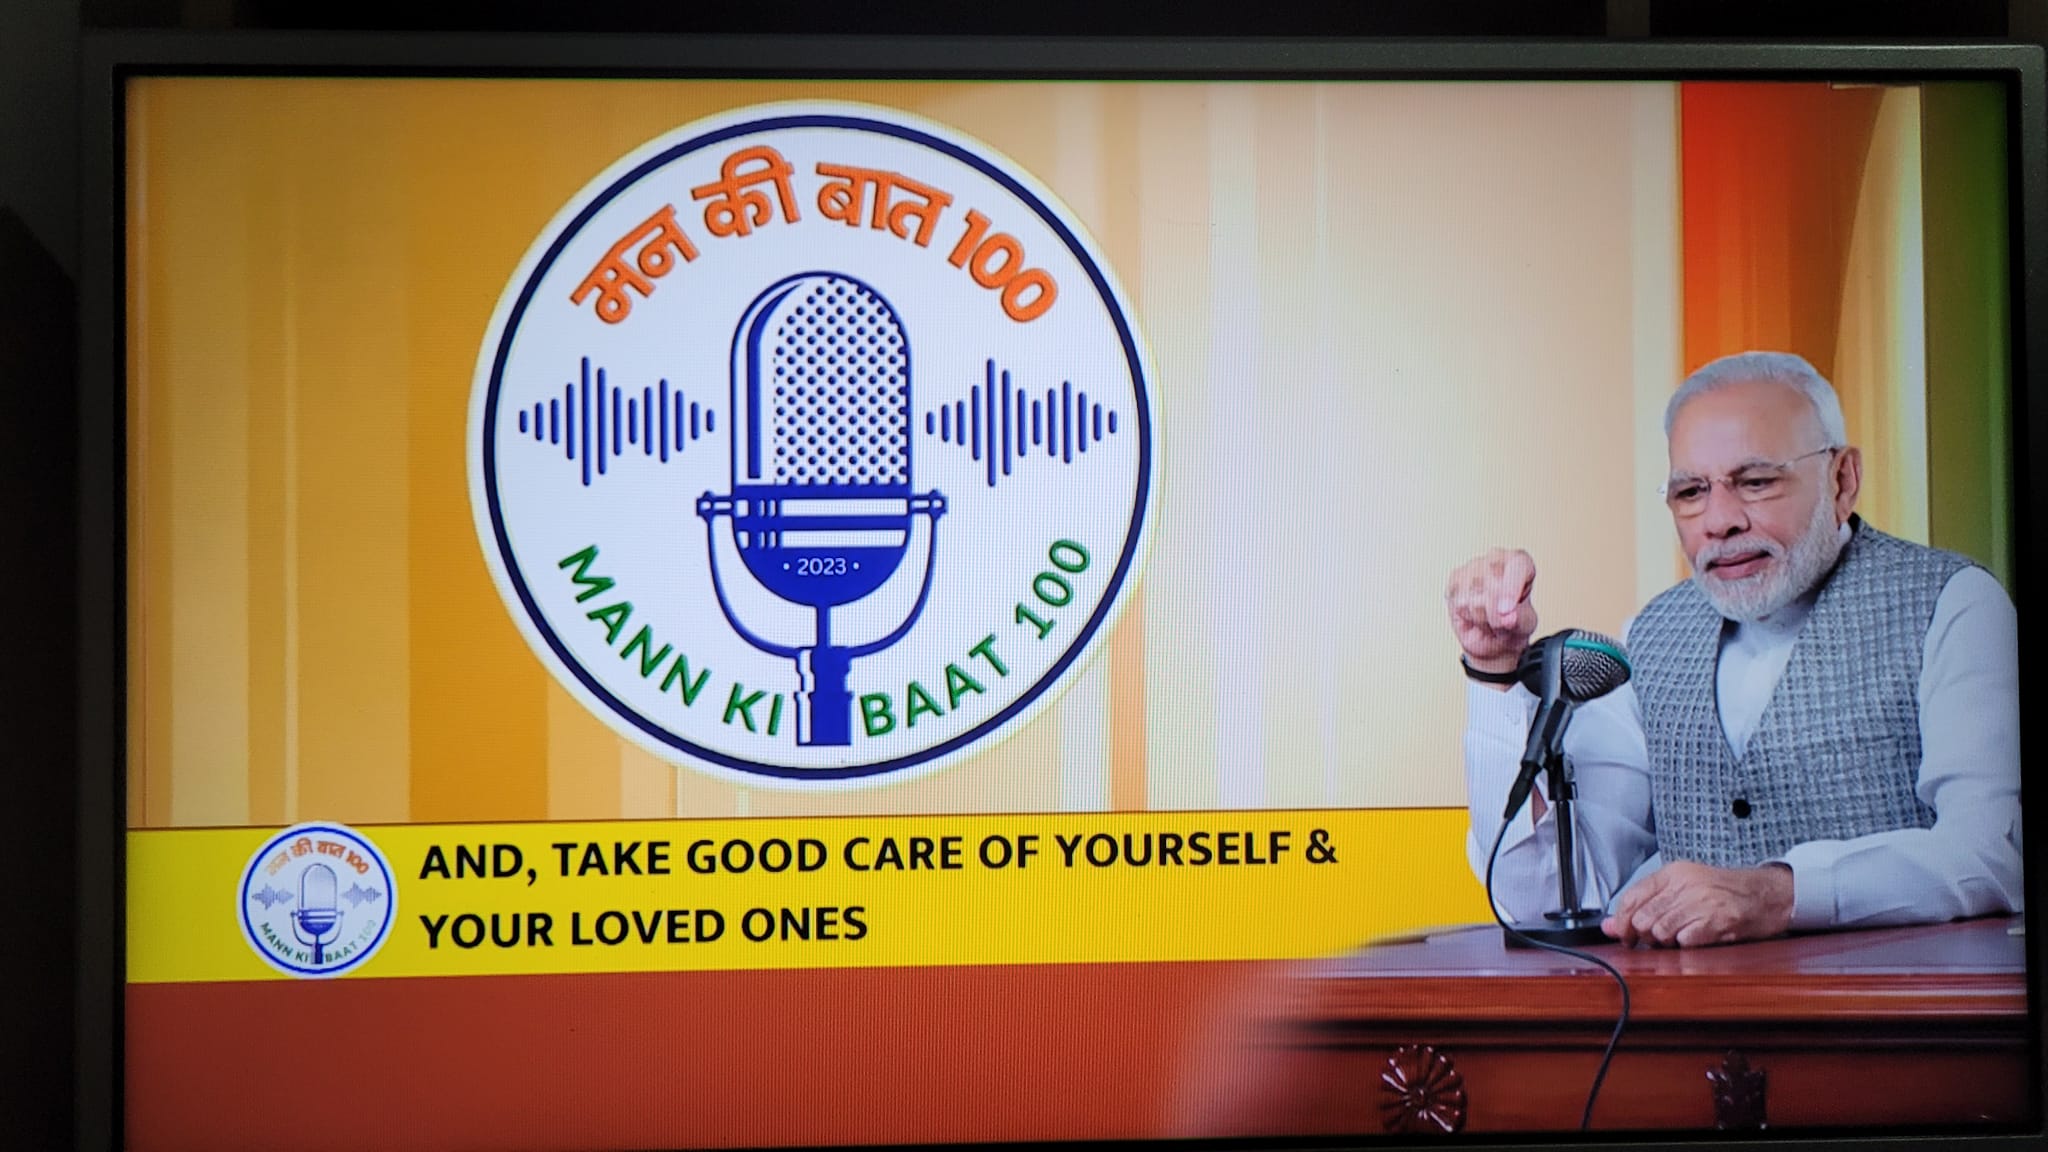 The Embassy widely publicized the live telecast event of 100 th episode of Prime Minister’s Mann ki Baat through its social media and organized special Open House at Embassy to mark the event. The Mission also carried out live telecast of @MannKiBaat100.